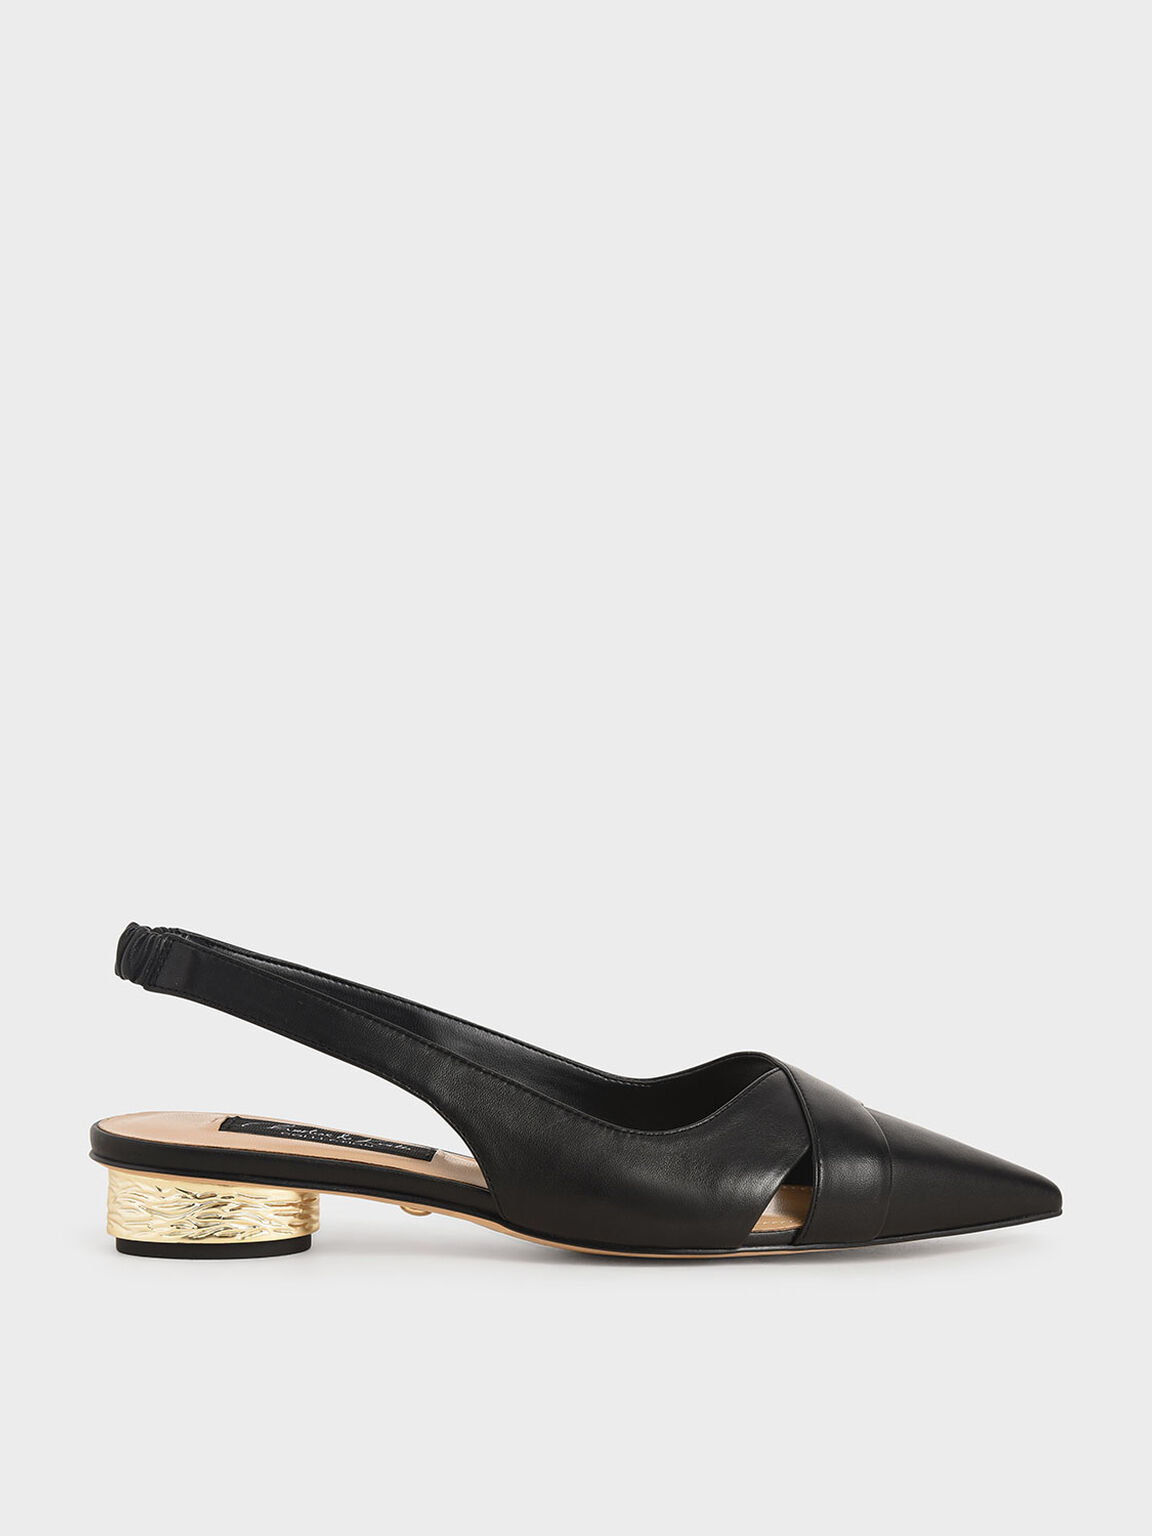 Black Leather Slingback Court Shoes | CHARLES & KEITH US